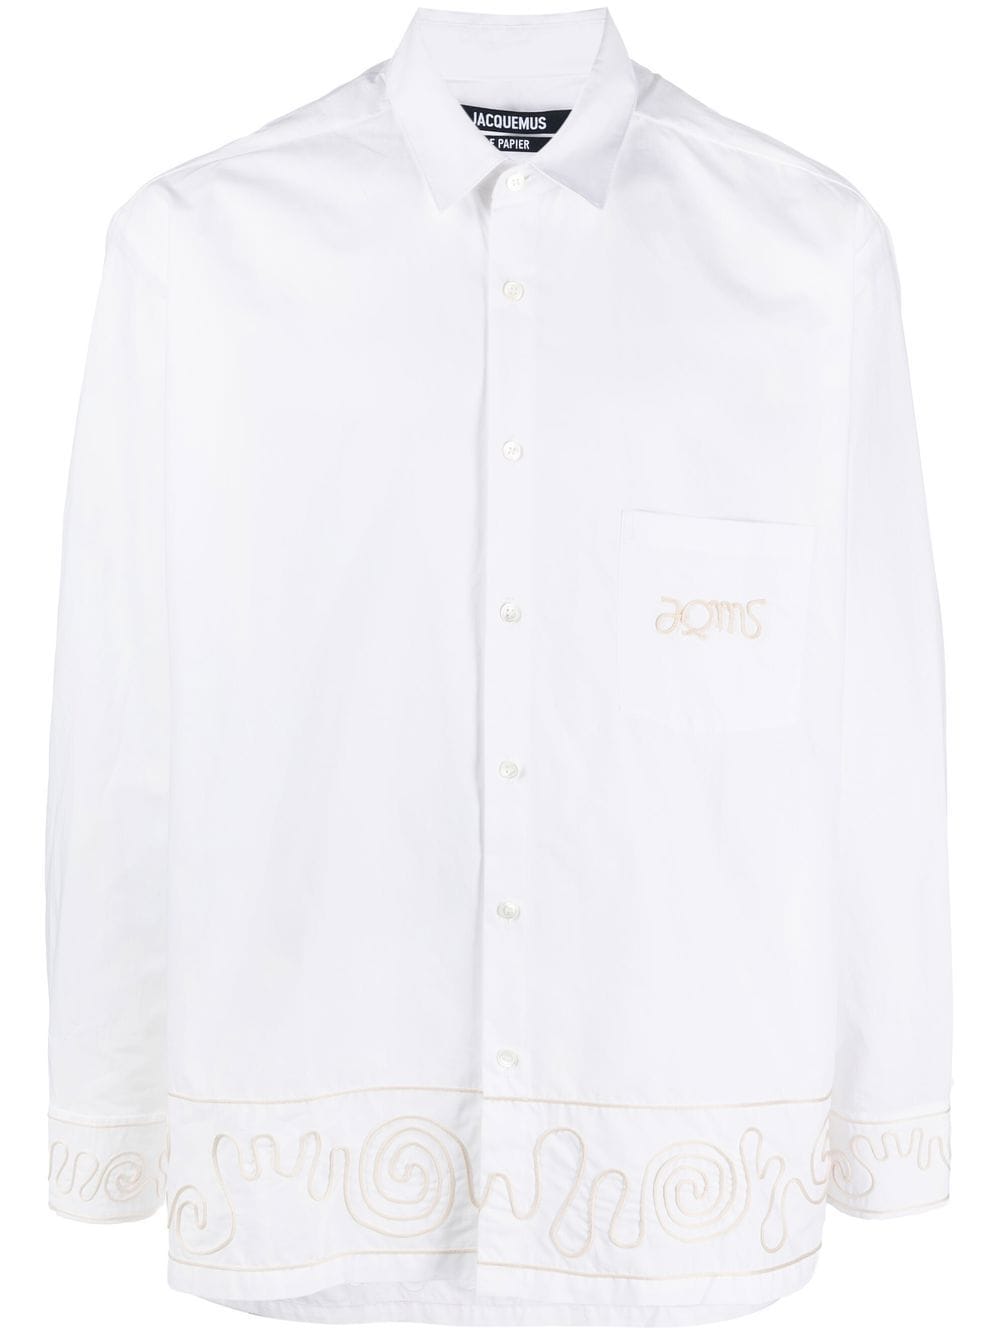 Image 1 of Jacquemus embroidered design long-sleeve shirt